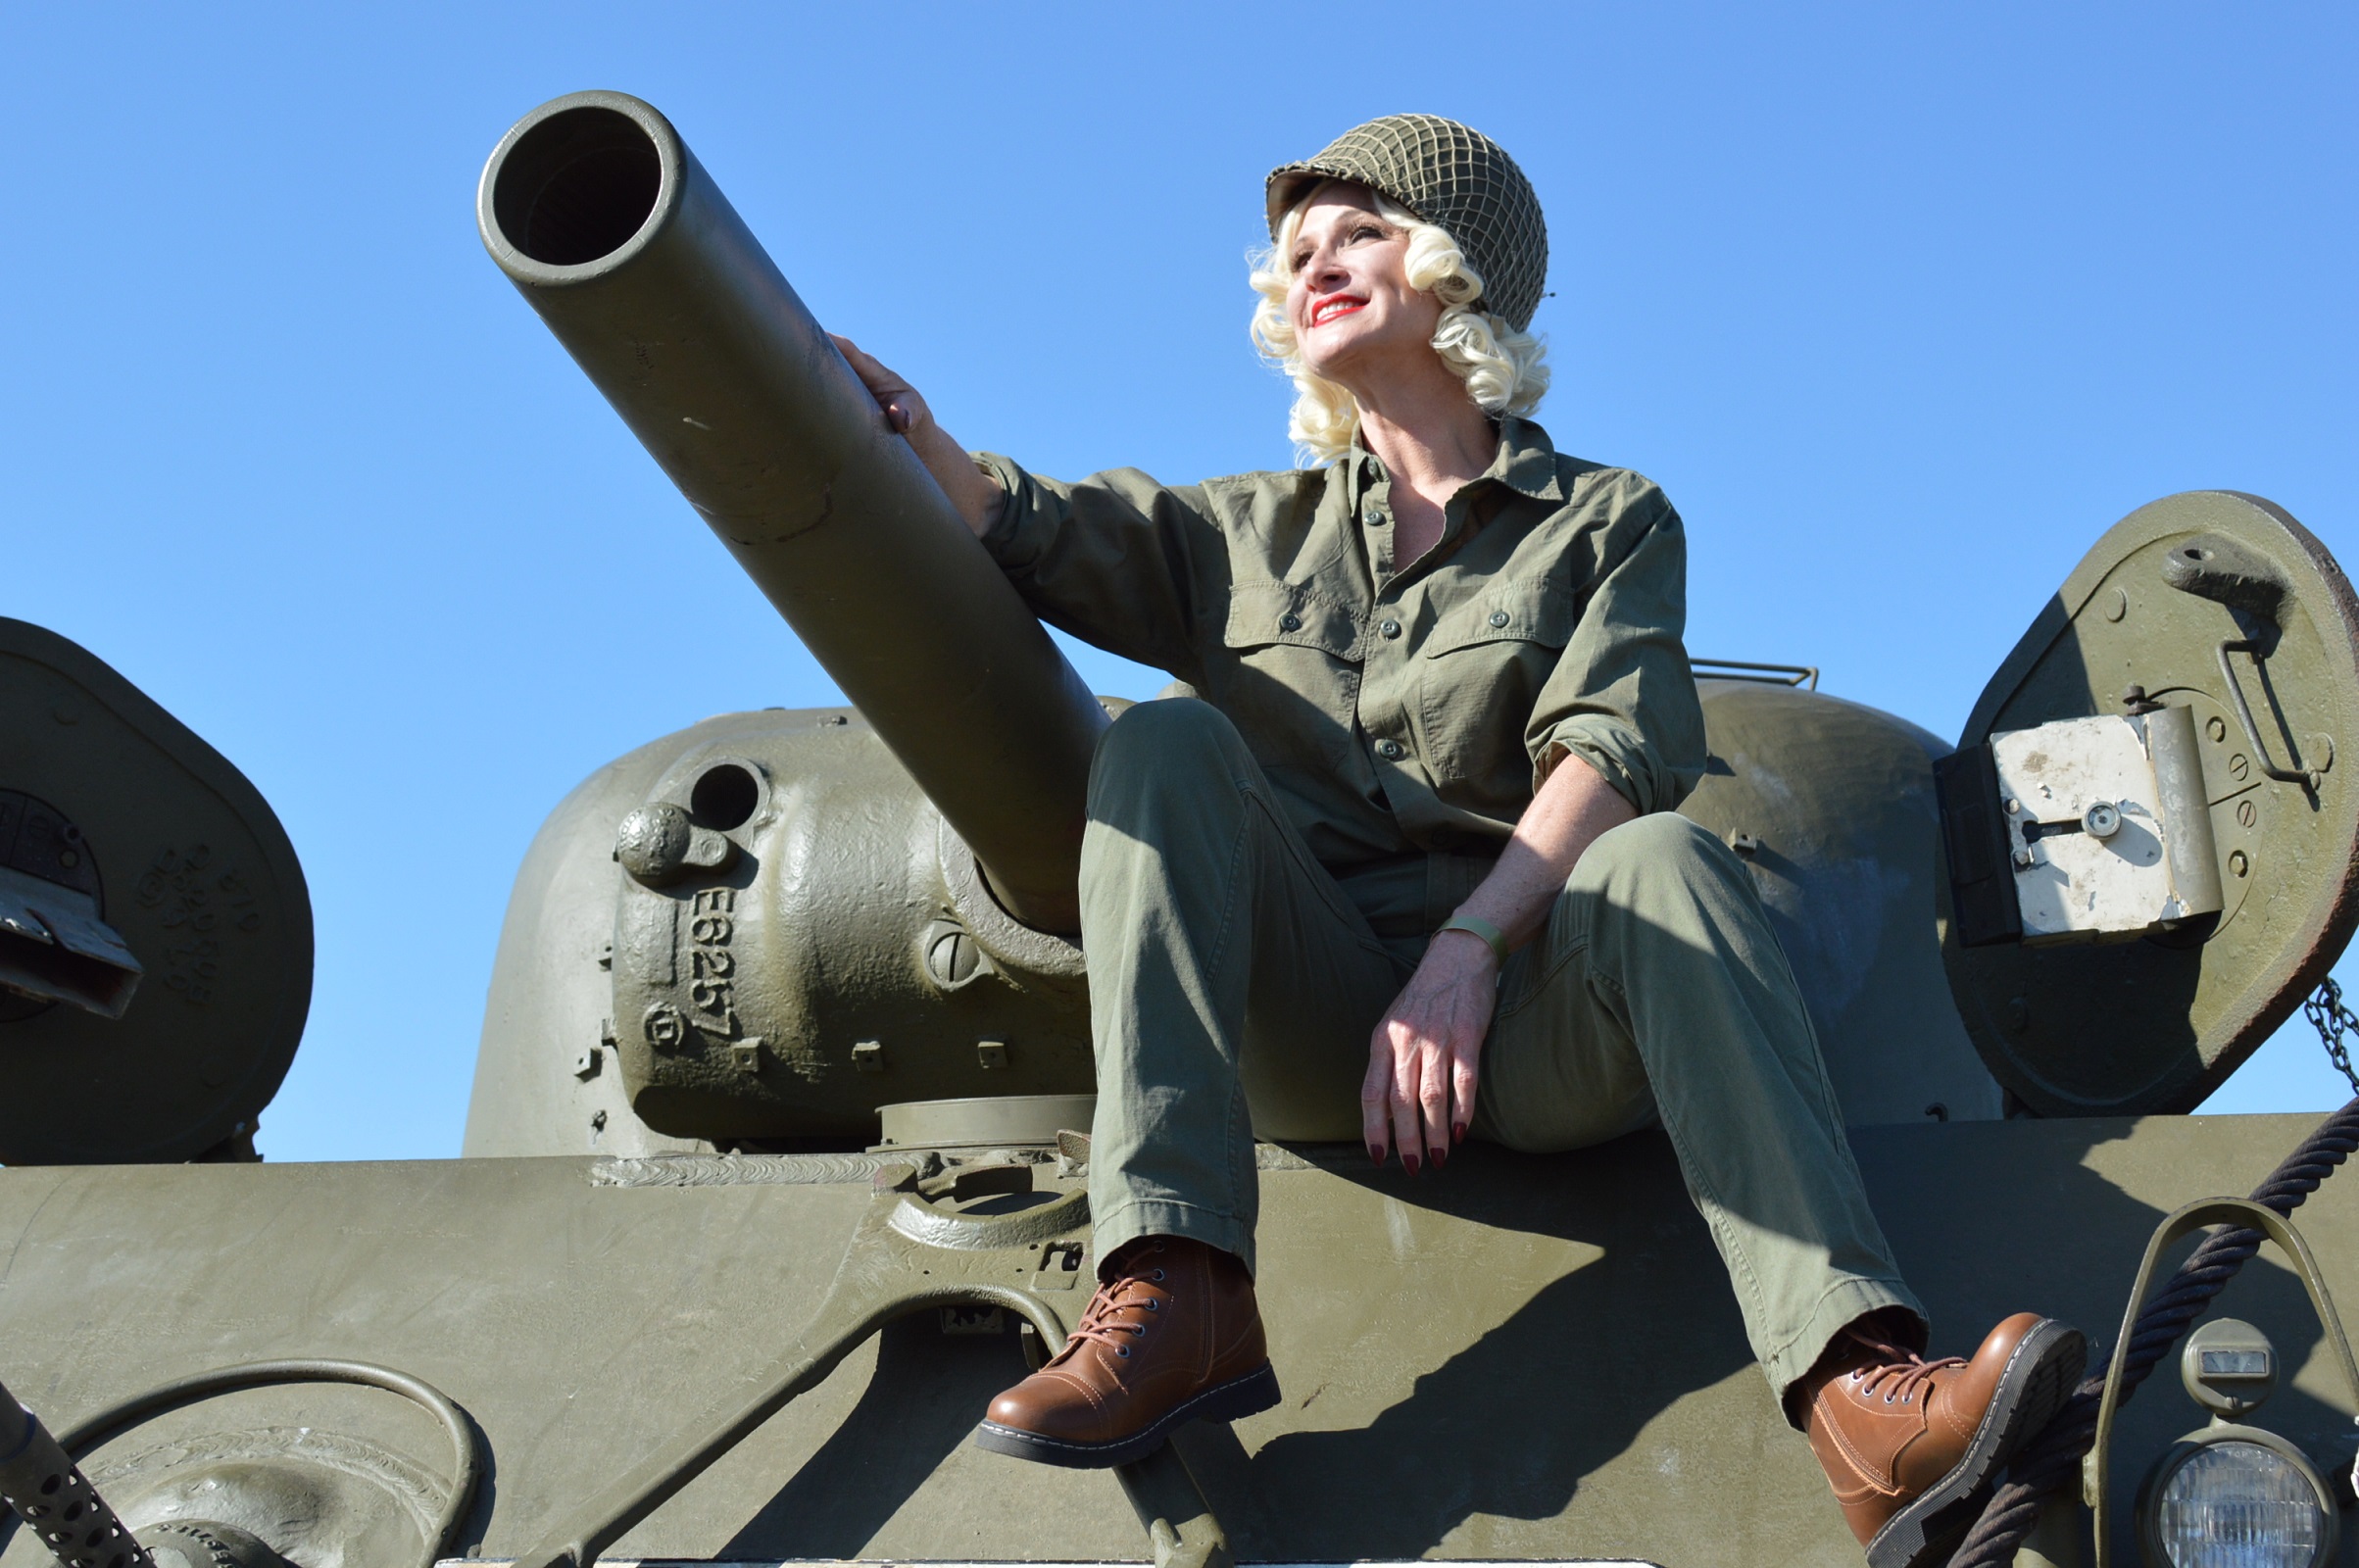 "Dietrich" actress Cindy Marinangel aboard the M4A2 Sherman tank "Battling Bitch II" at the 2022 MAAM WWII Weekend. (credit Anthony C. Hayes)